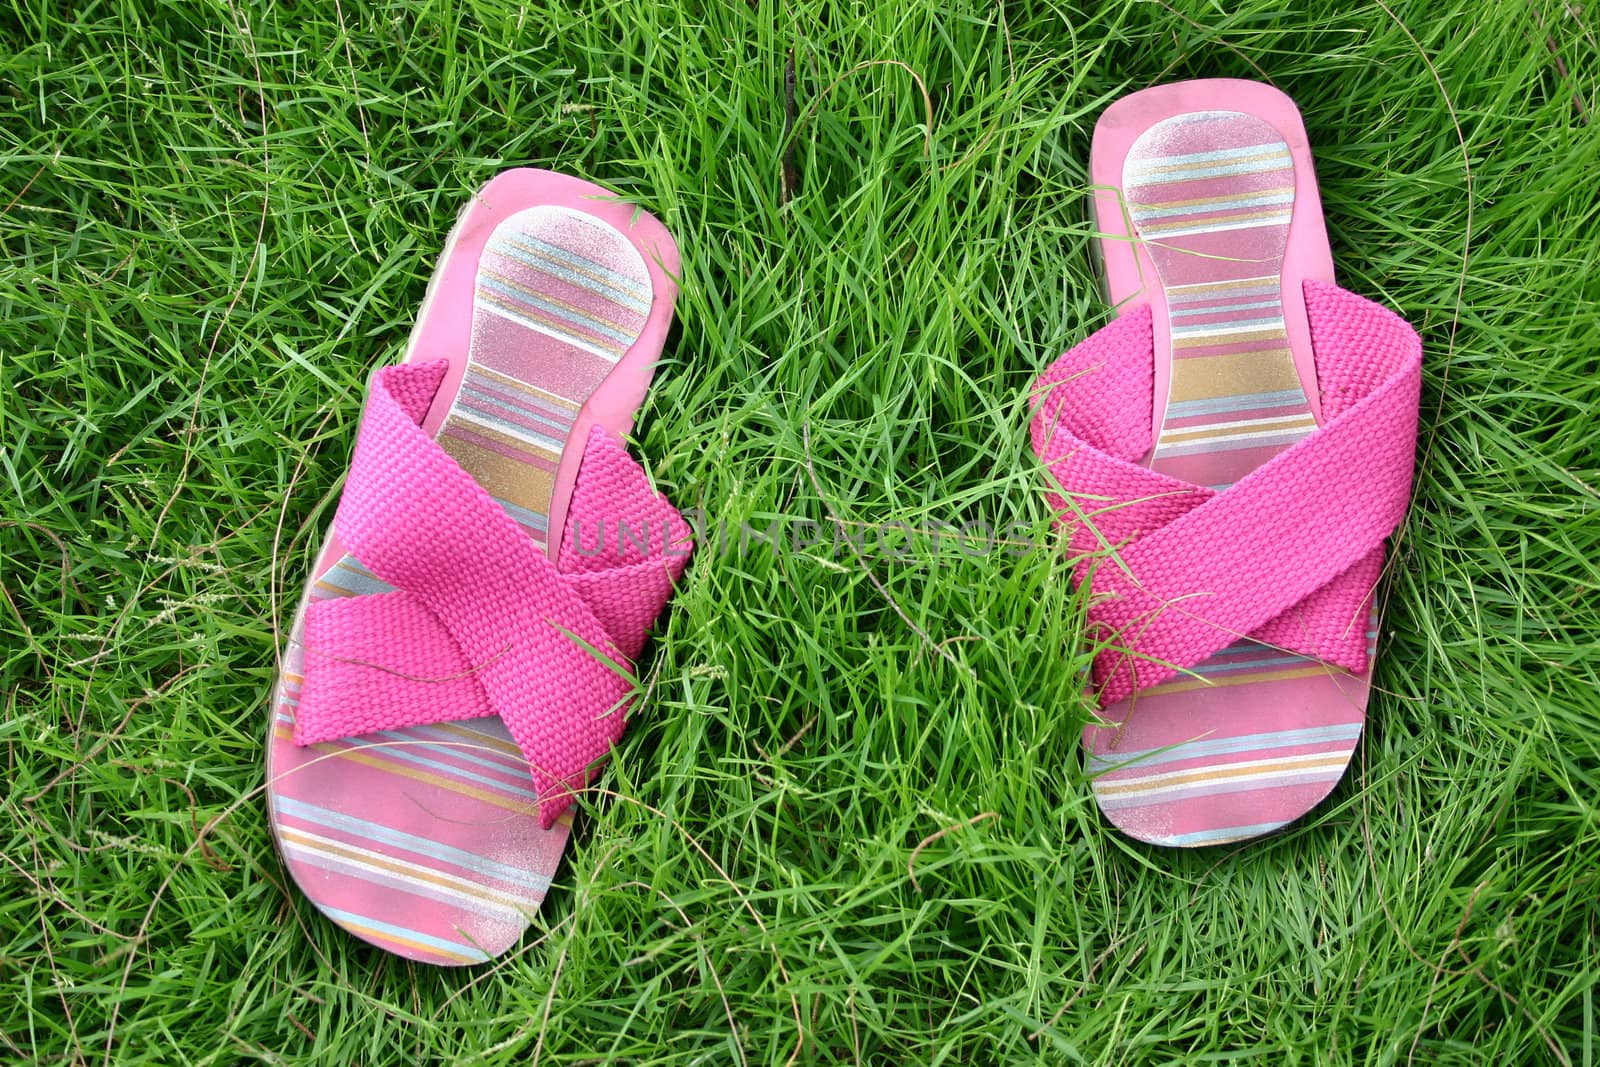 Shoes in Lawn